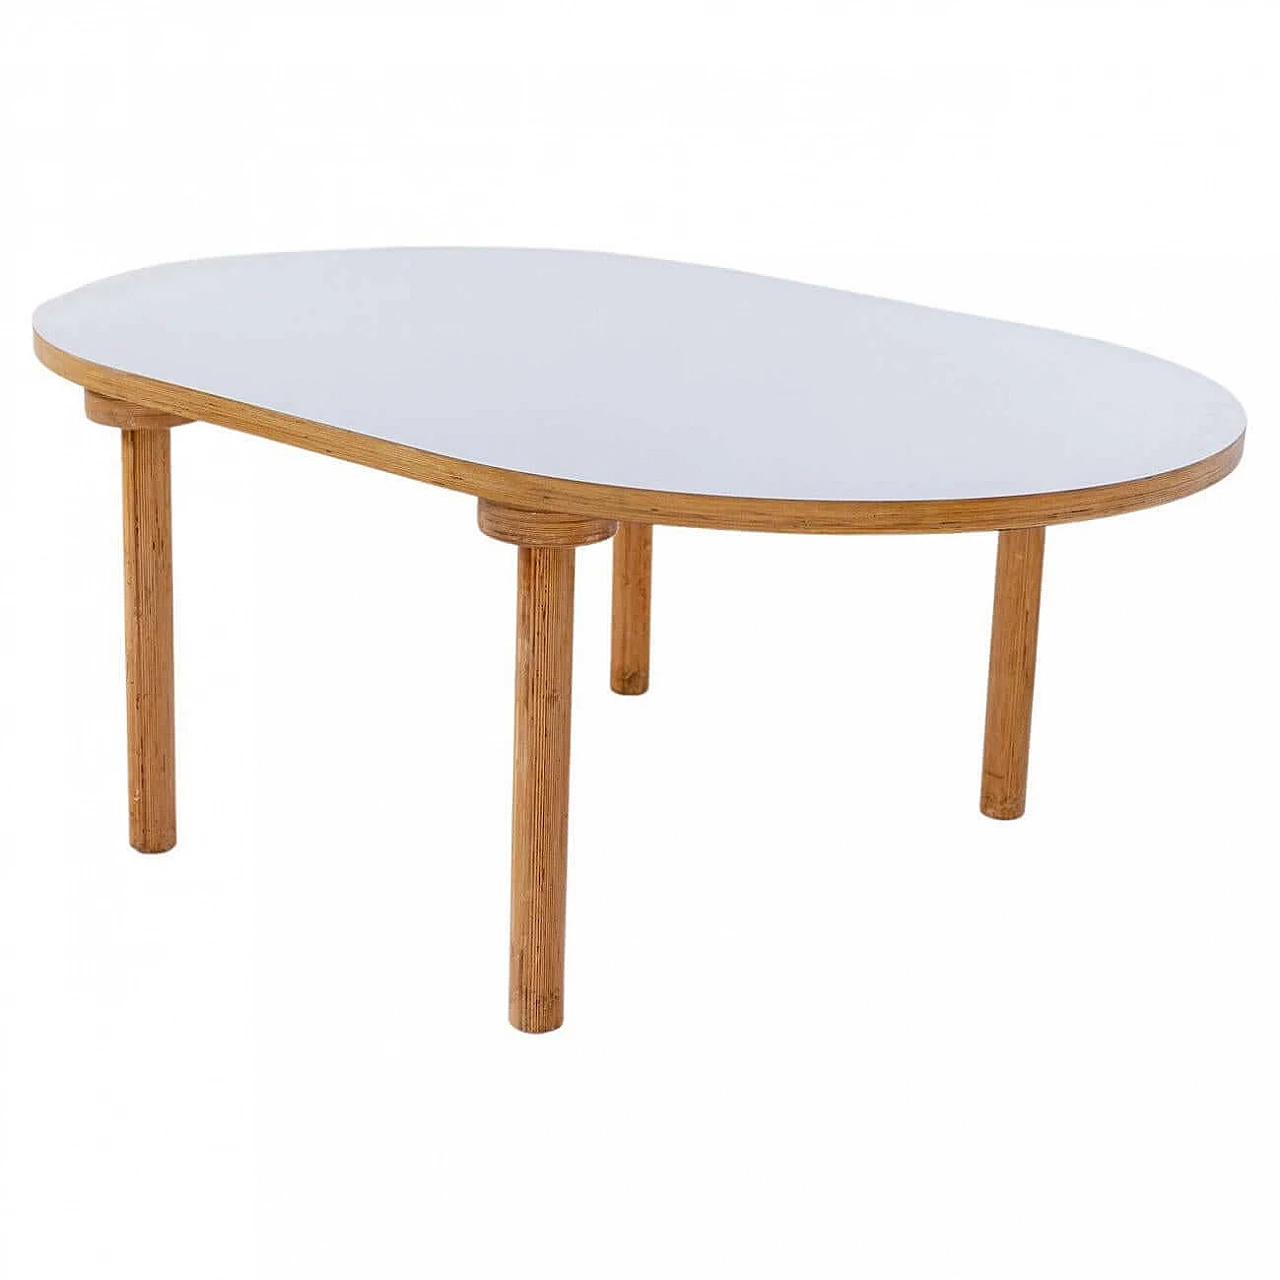 Plywood table with white laminate top by Mari for Driade, 1970s 1384083